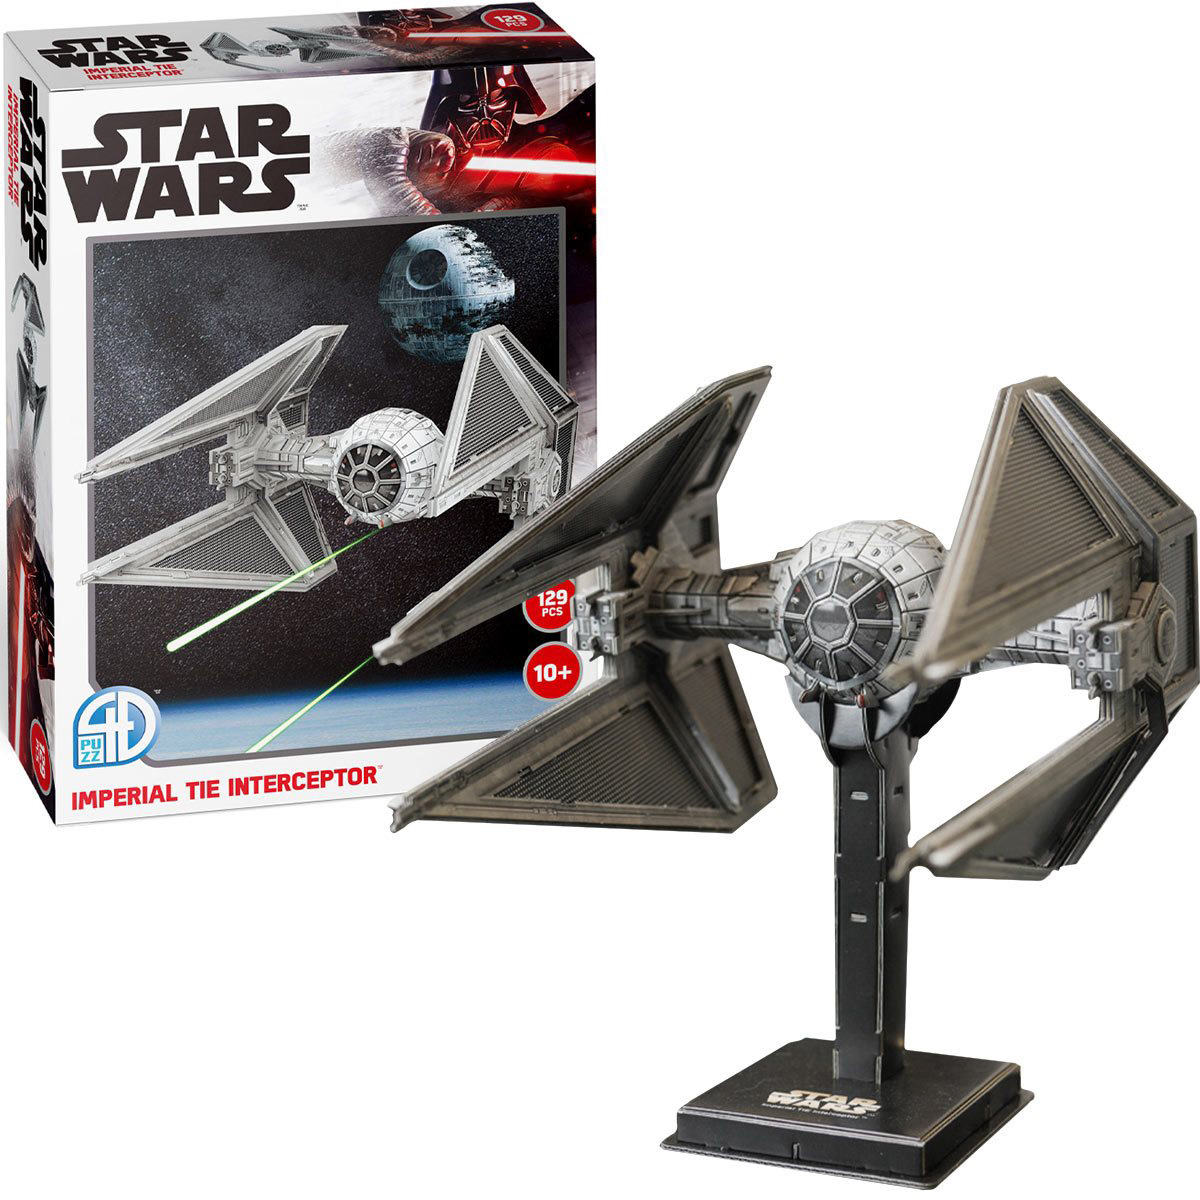 3D Star Wars Imperial Tie Interceptor Fighter Space Jigsaw Puzzle